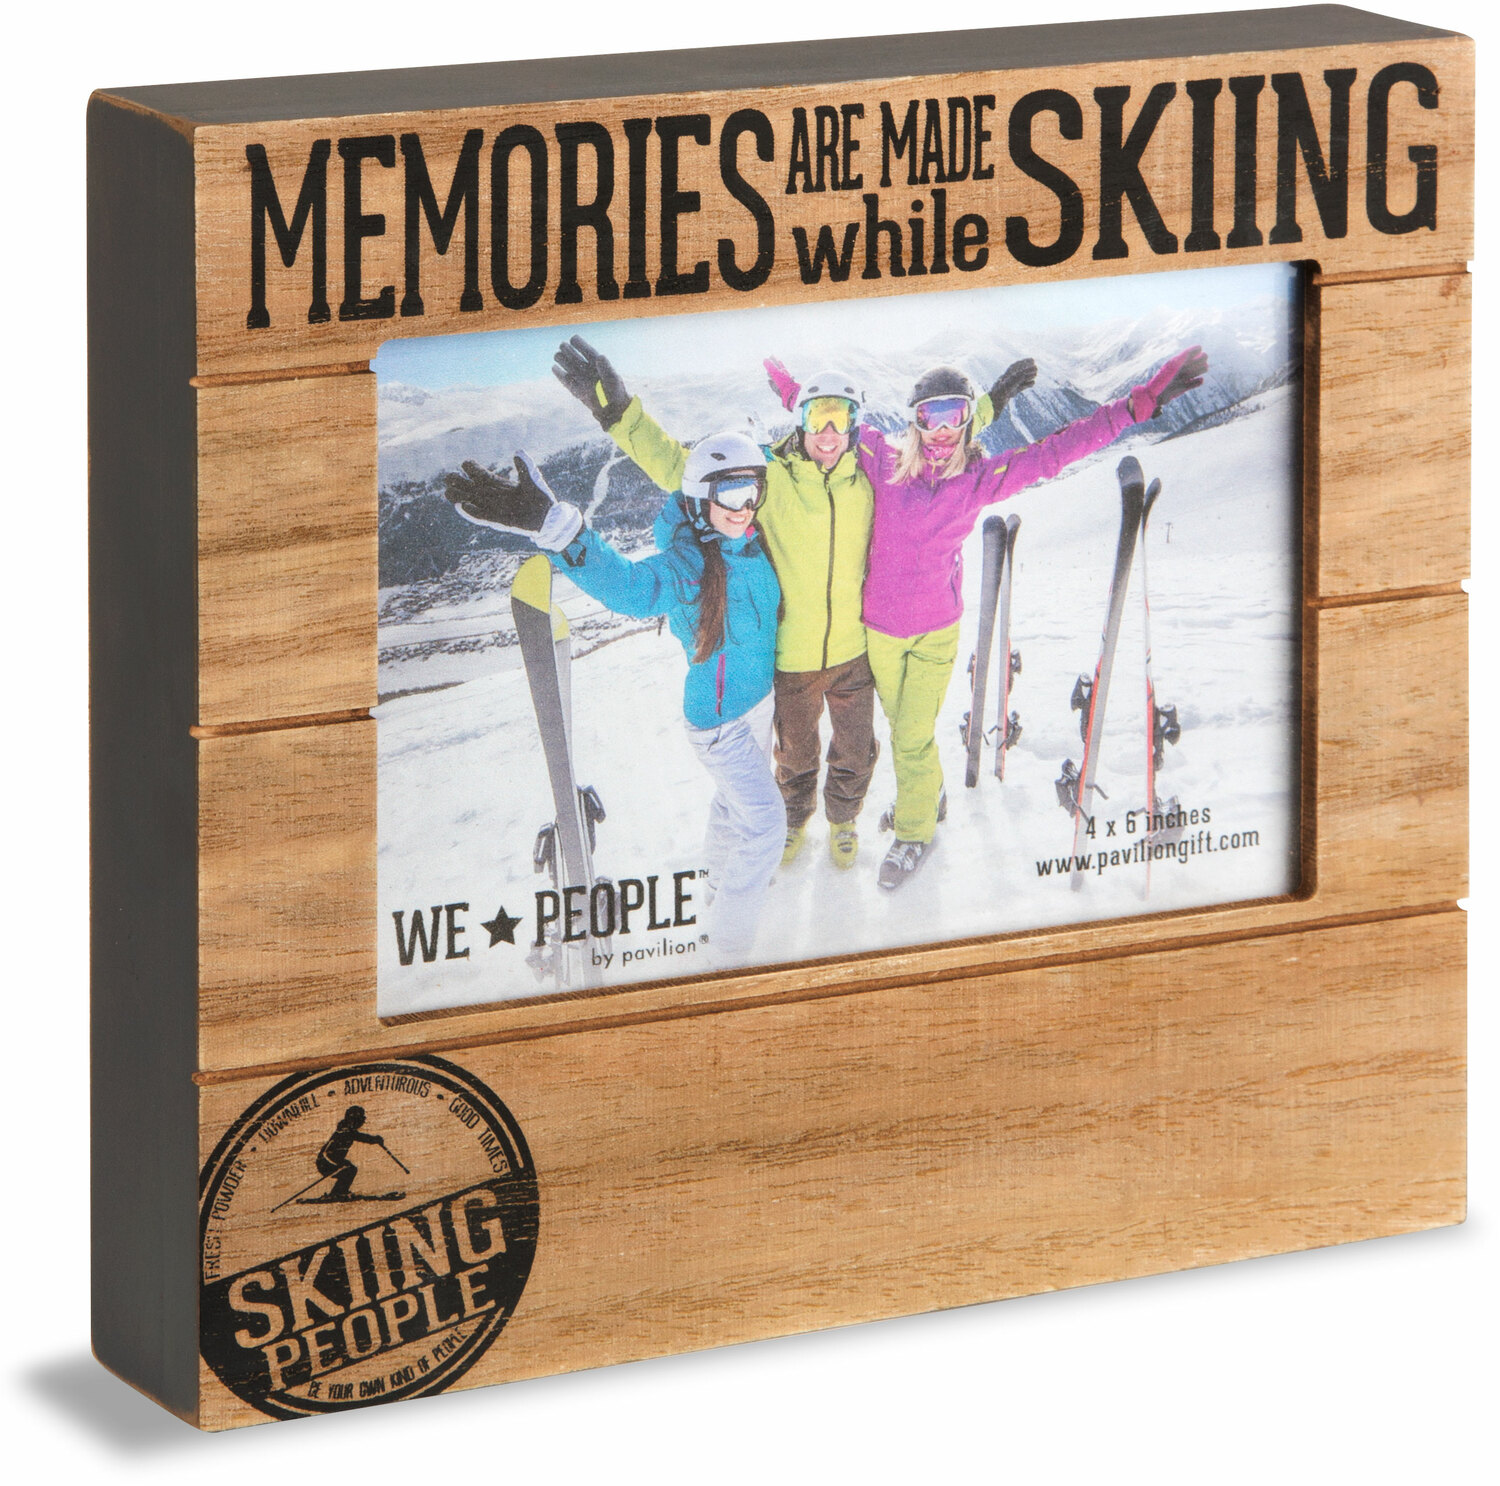 Skiing People by We People - Skiing People - 6.75" x 7.5" Frame (Holds 4" x 6" photo)